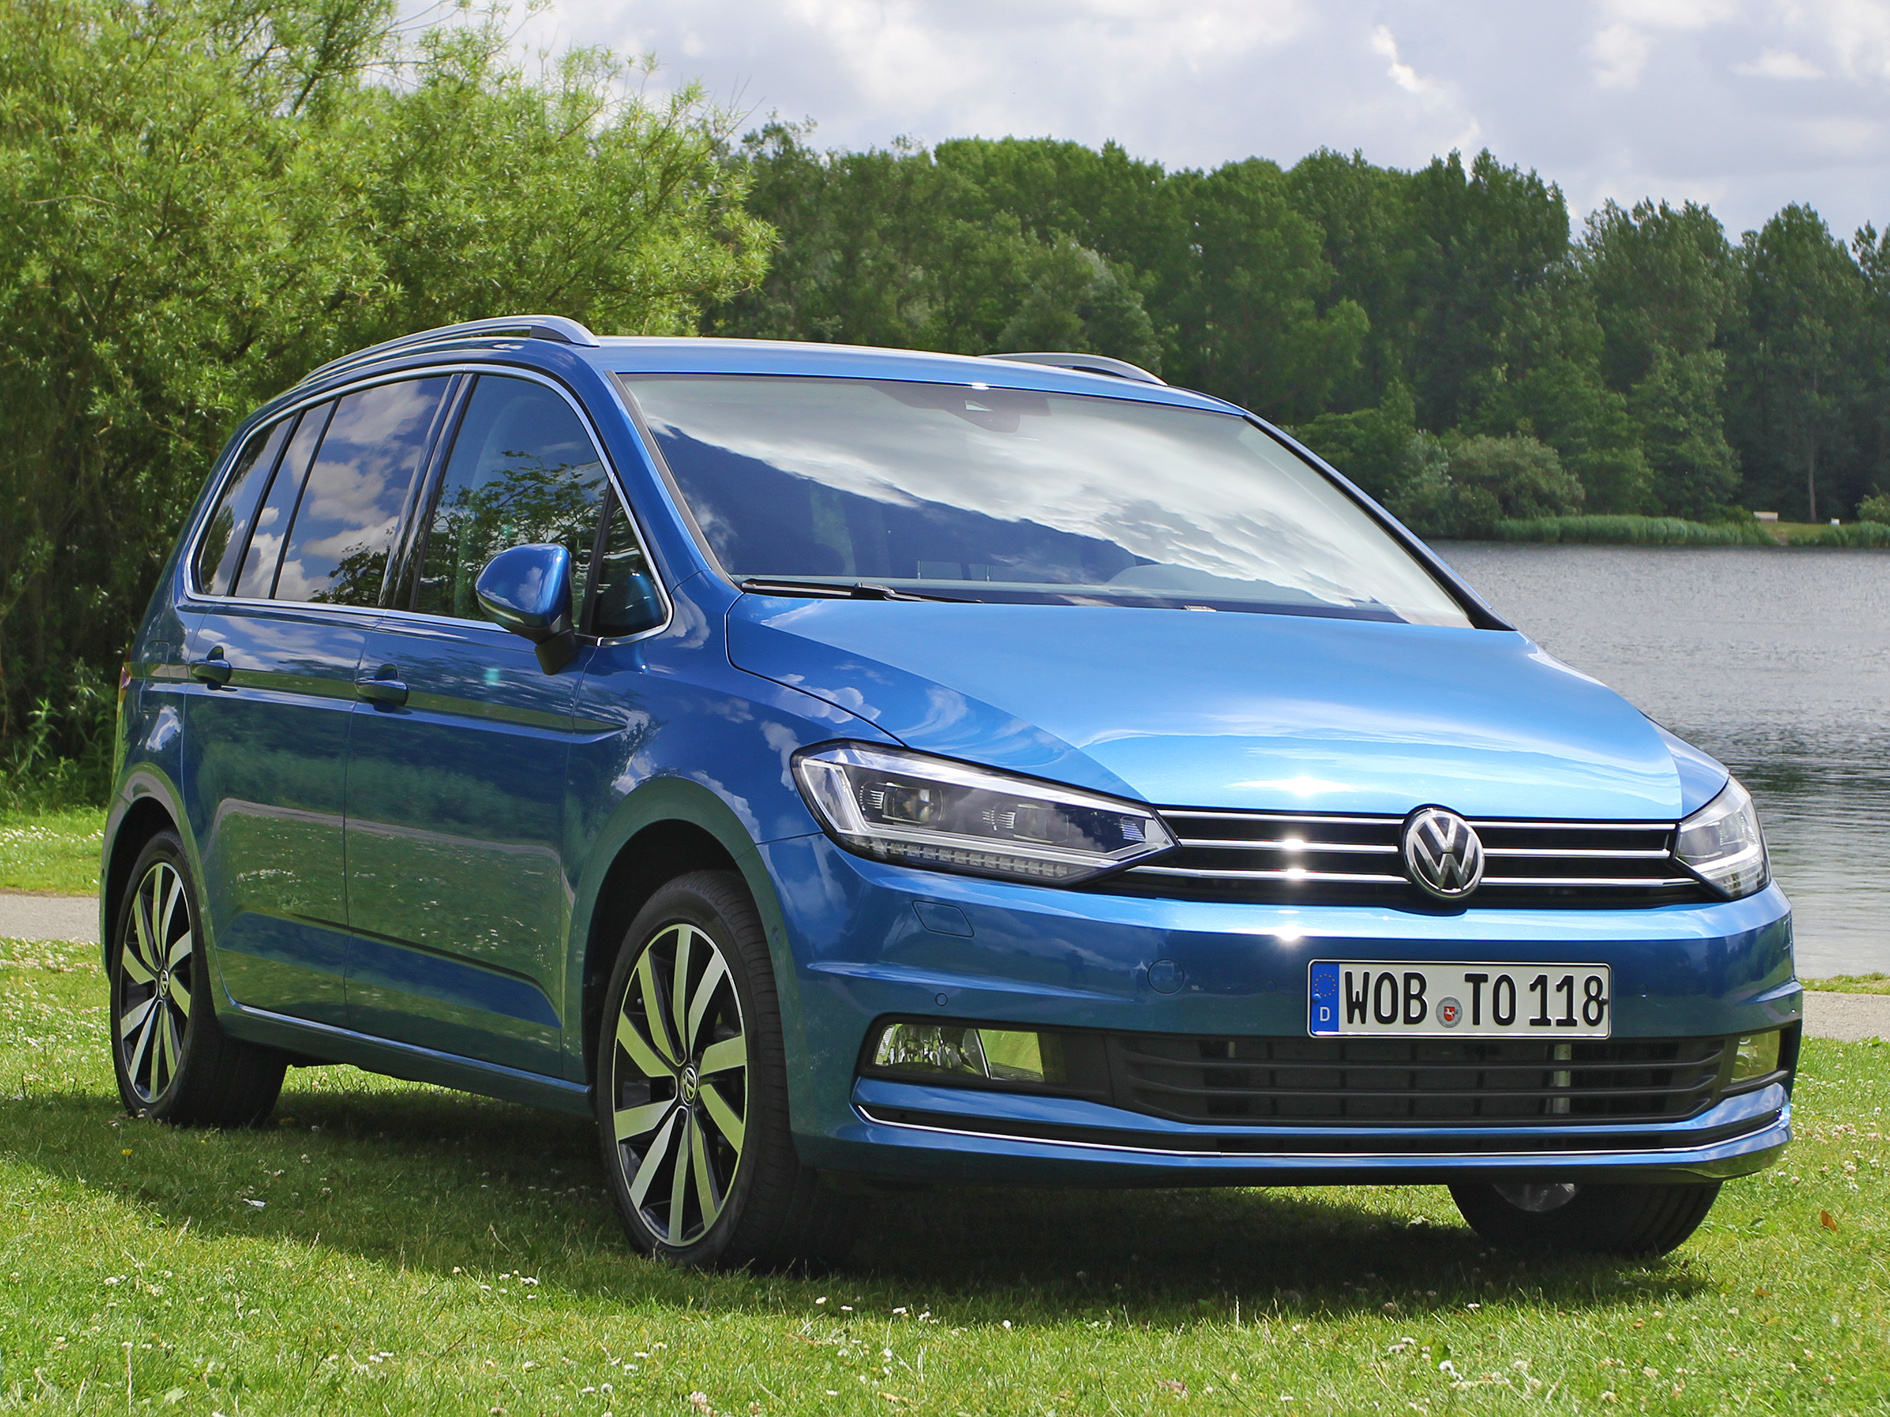 Review: All-new VW Touran 2.0 TDI – The MPV all-rounder ...